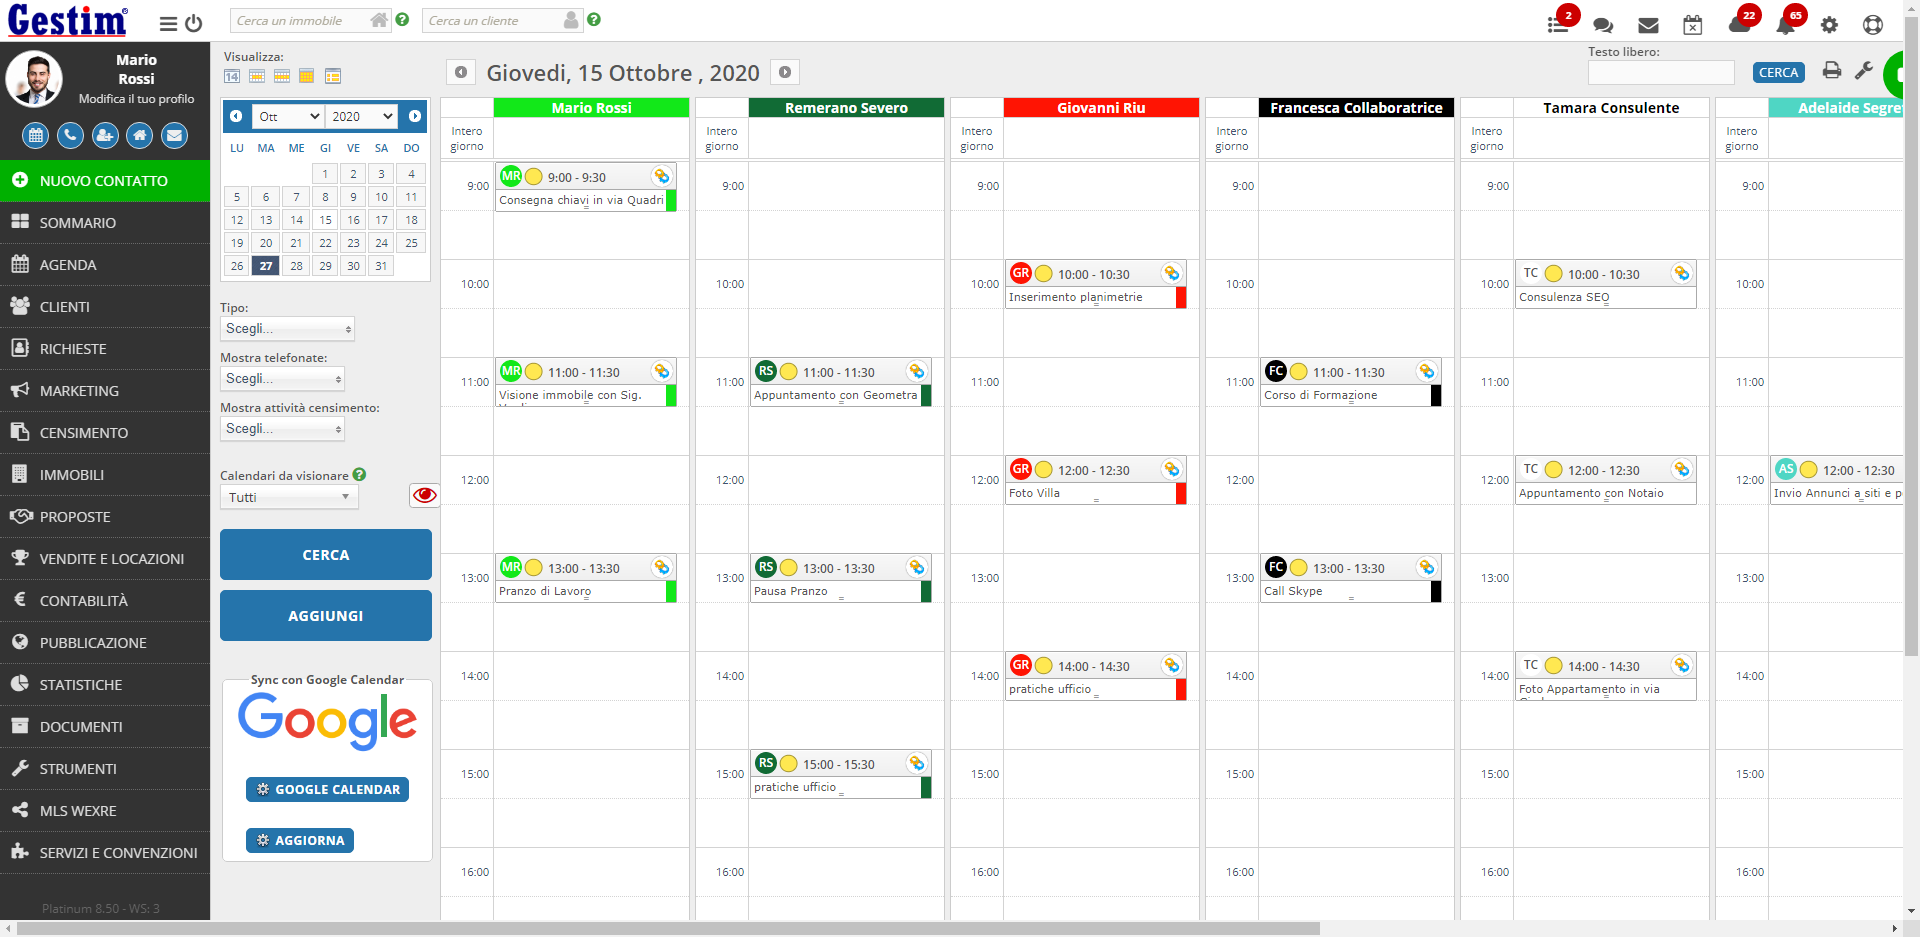 Calendar synced with Google Calendar in real time